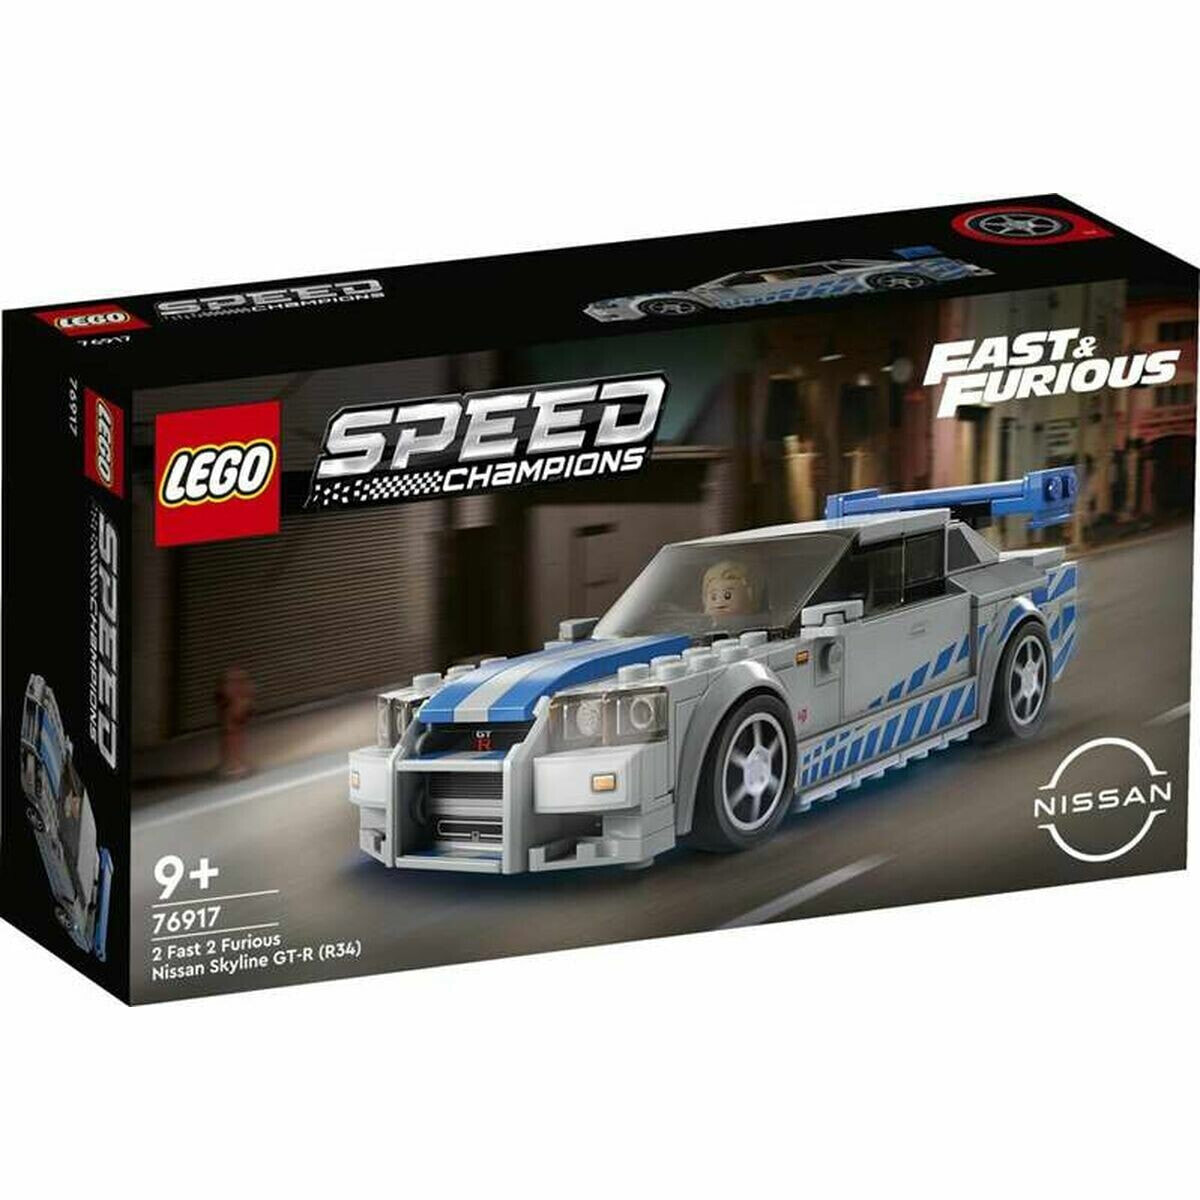 Playset Lego Fast and Furious: 76917 Nissan Skyline GT-R (R34) 319 Pieces